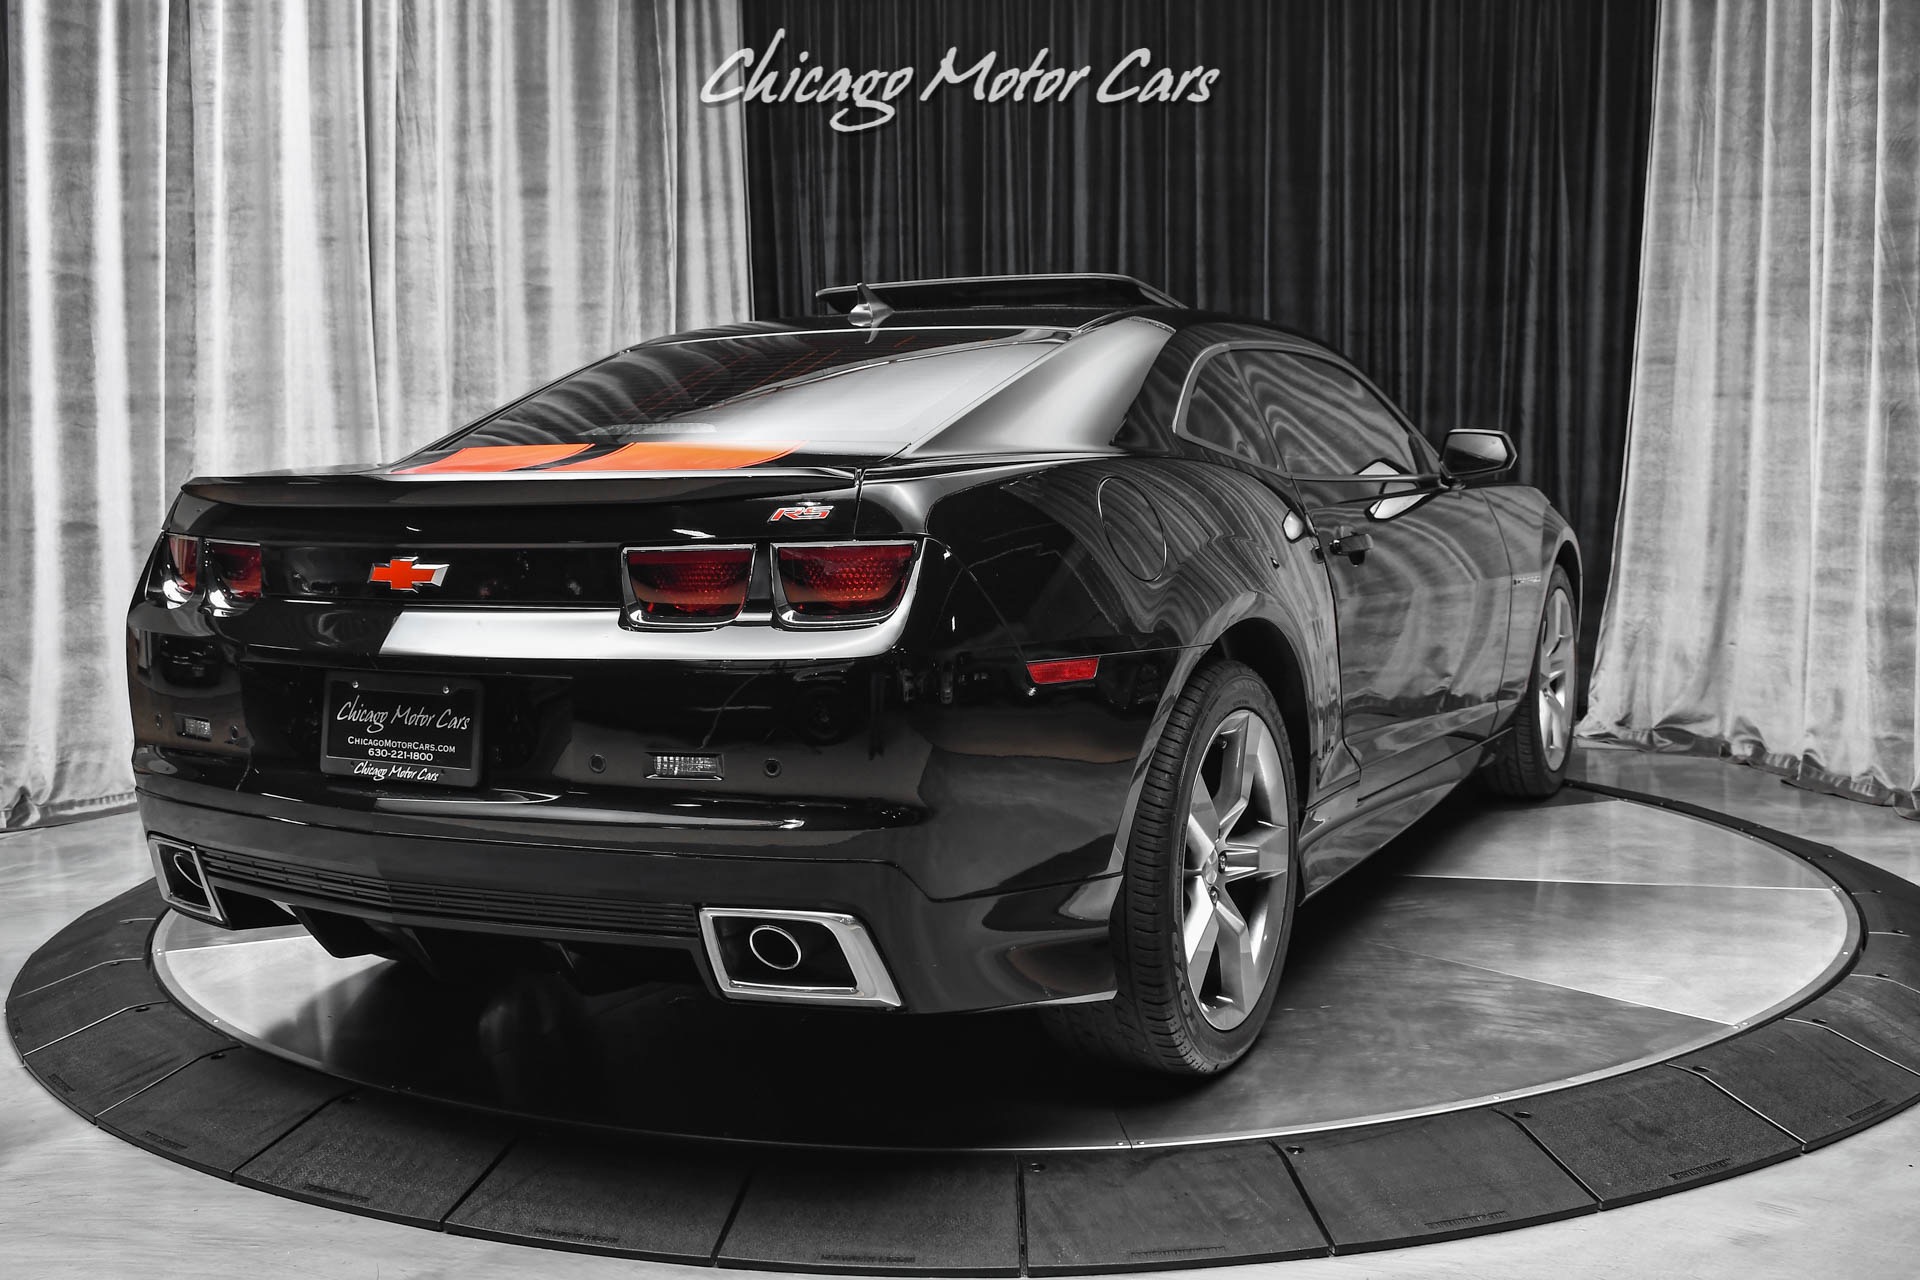 Used-2010-Chevrolet-Camaro-LT-RS-Package-American-Thunder-Exhaust